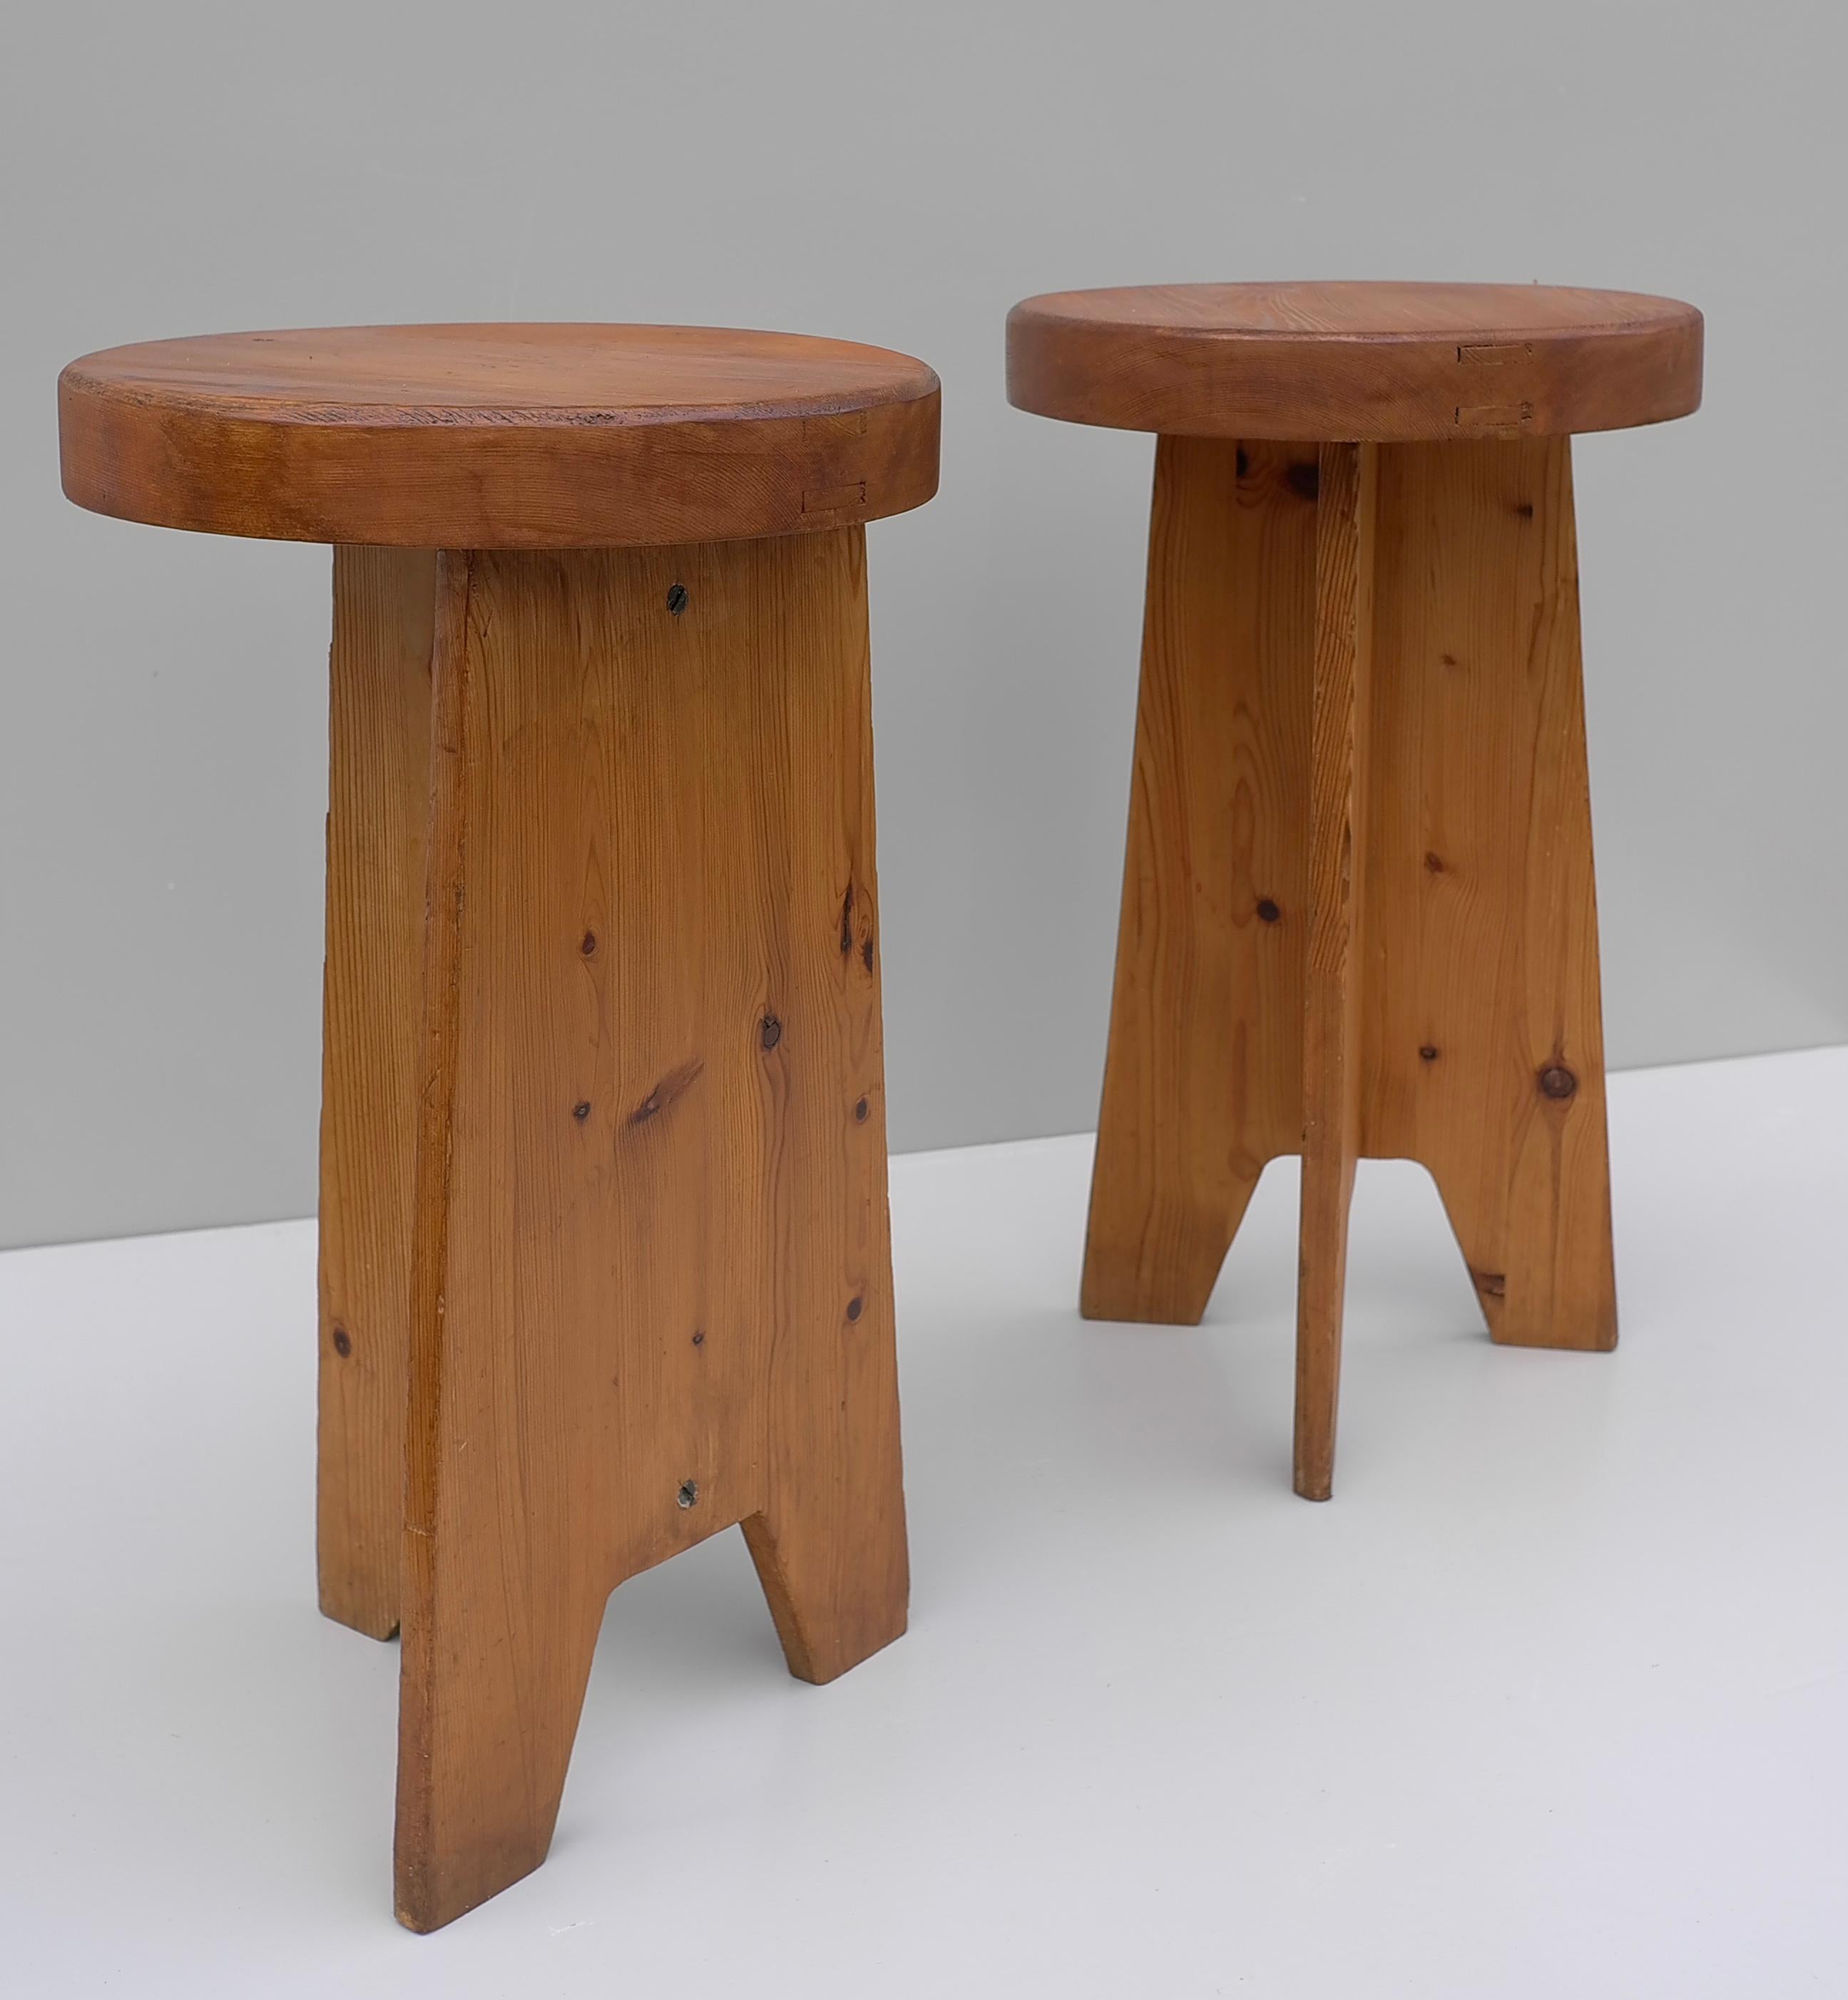 Pair of Monumental Mid-Century Modern Pine Stools, Scandinavia 1940's In Good Condition For Sale In Den Haag, NL